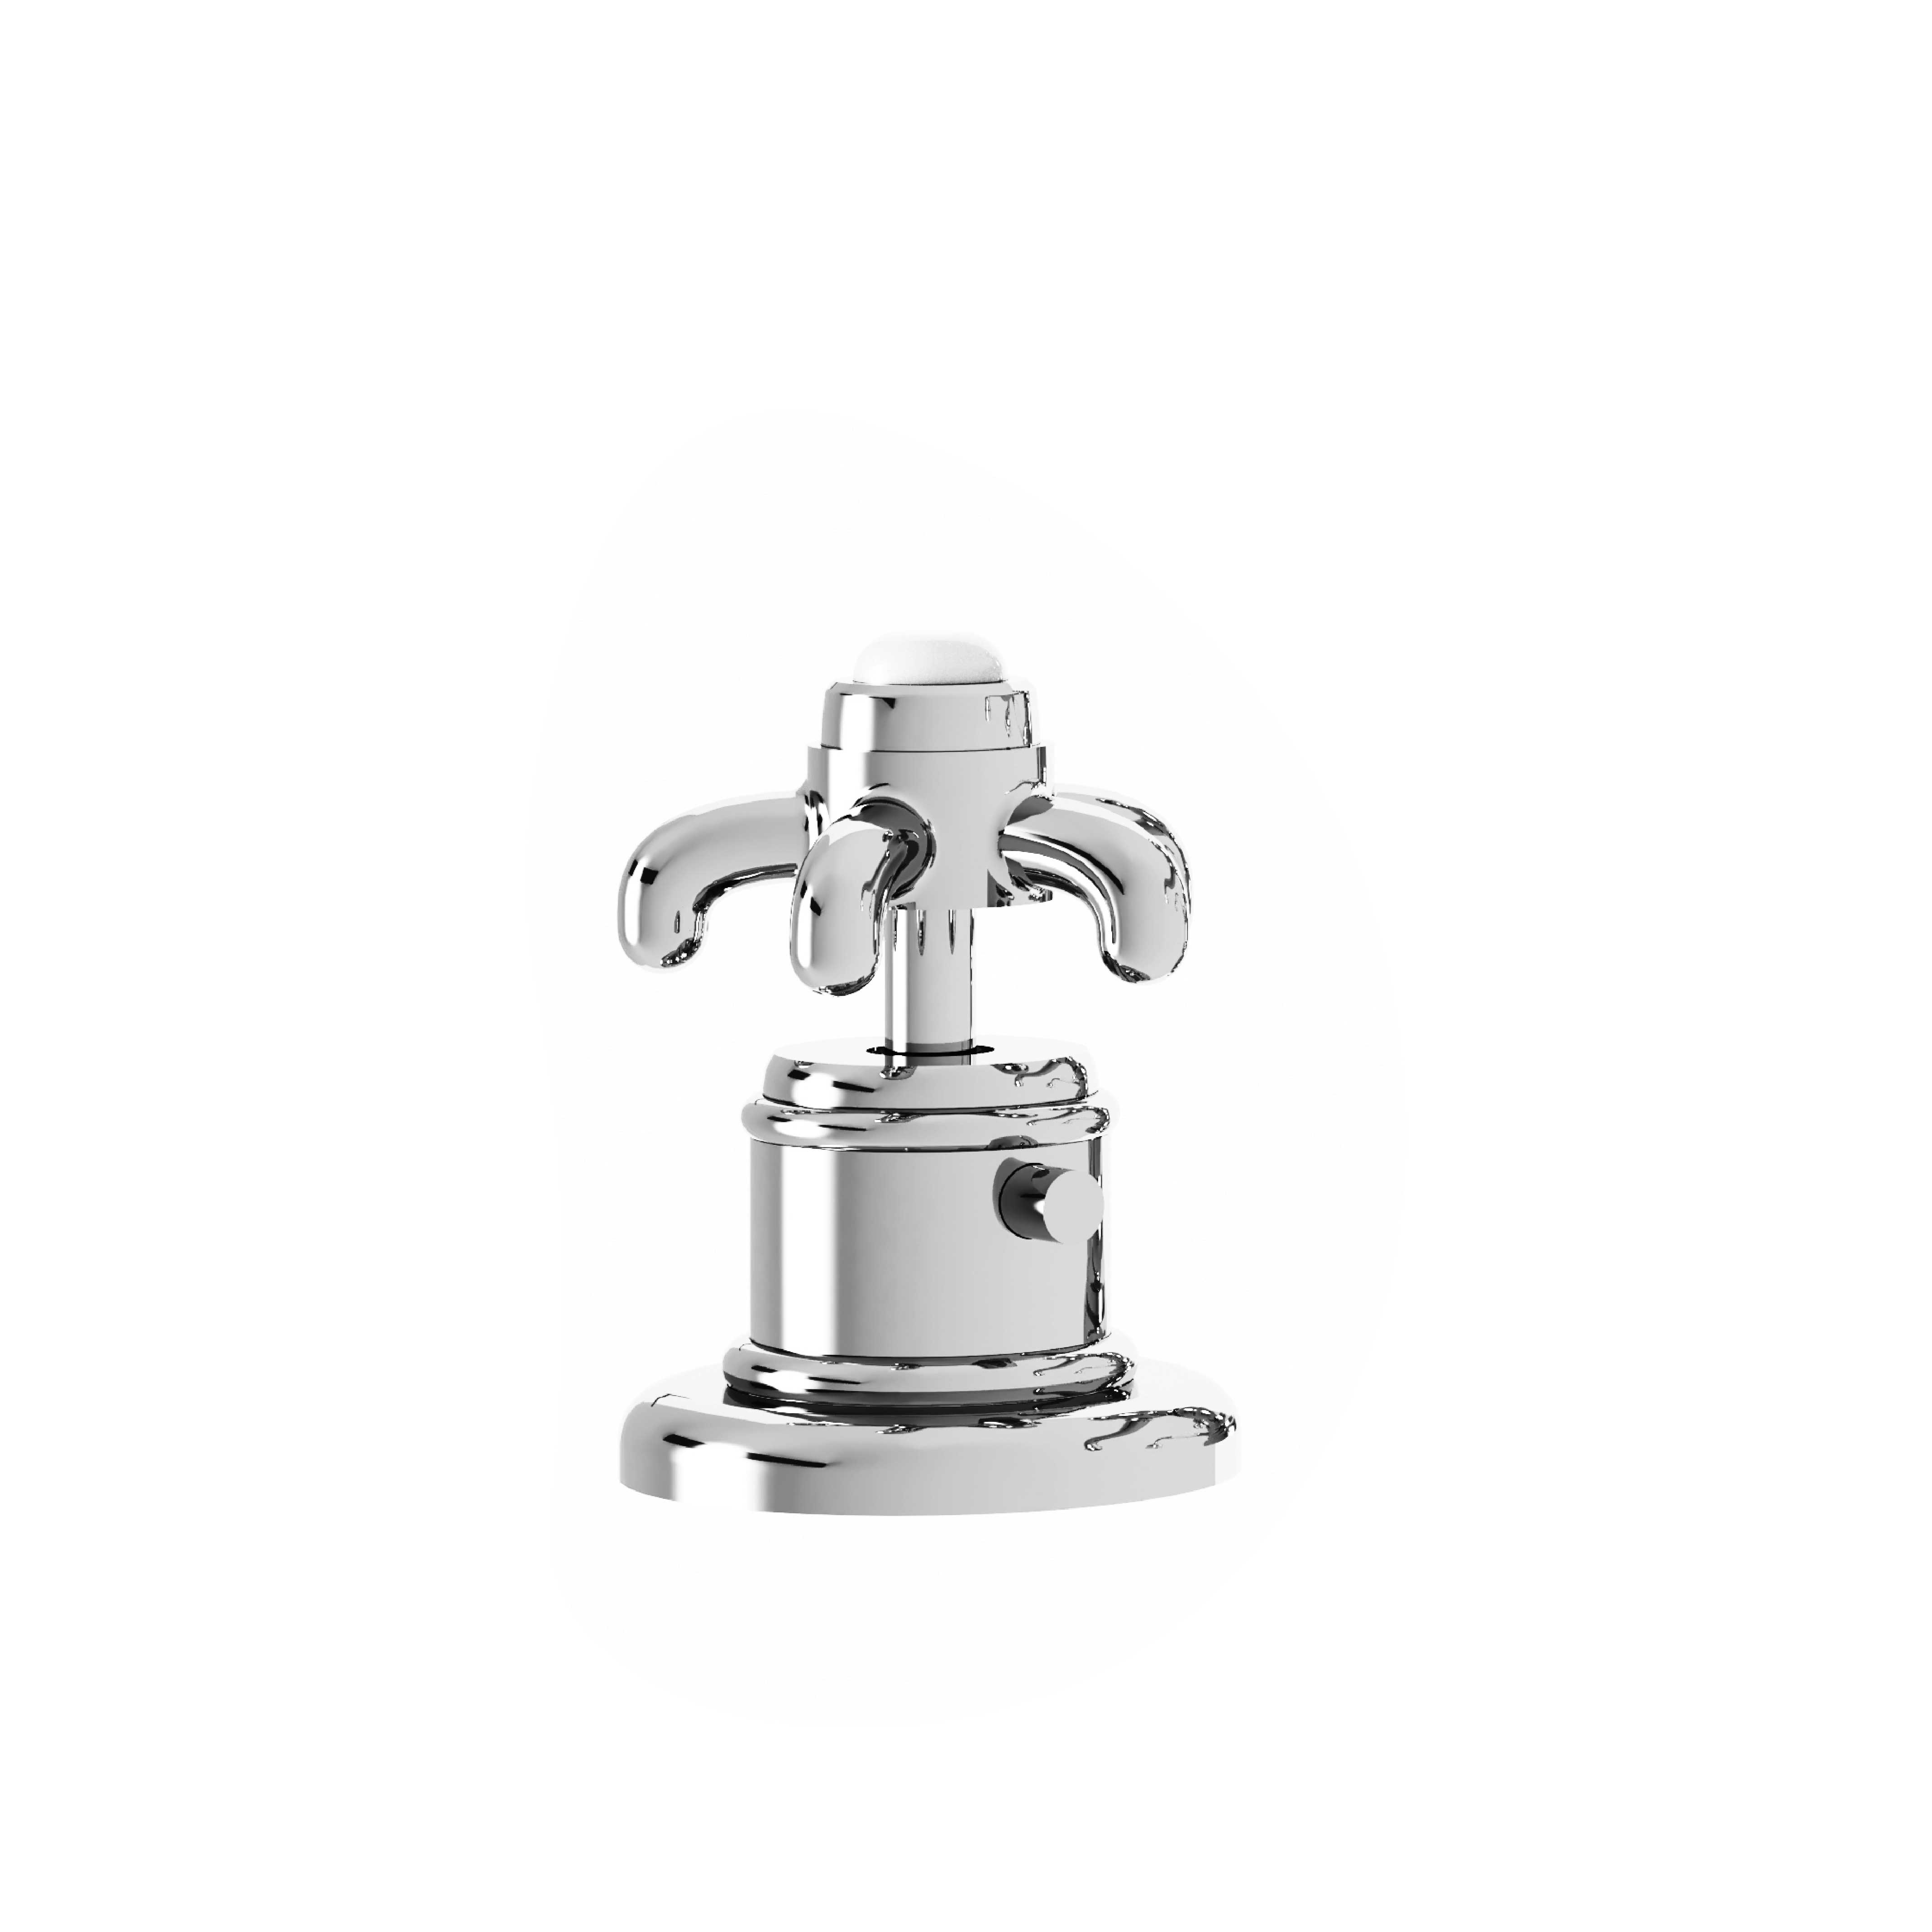 M01-330T Rim mounted thermo. mixer